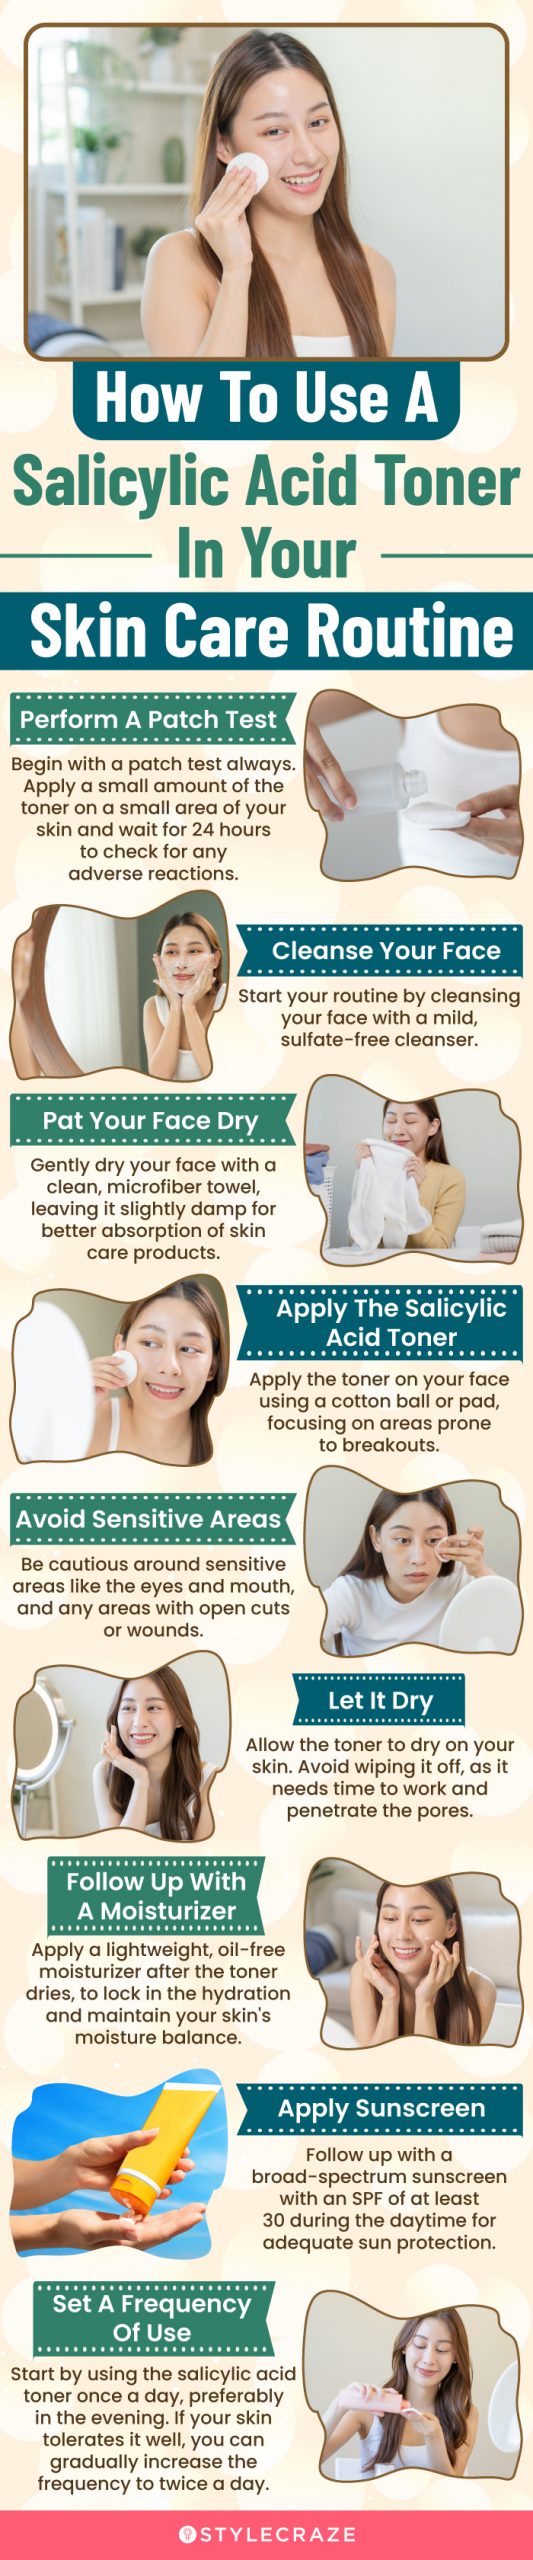 How To Use A Salicylic Acid Toner In Your Skin Care Routine (infographic)